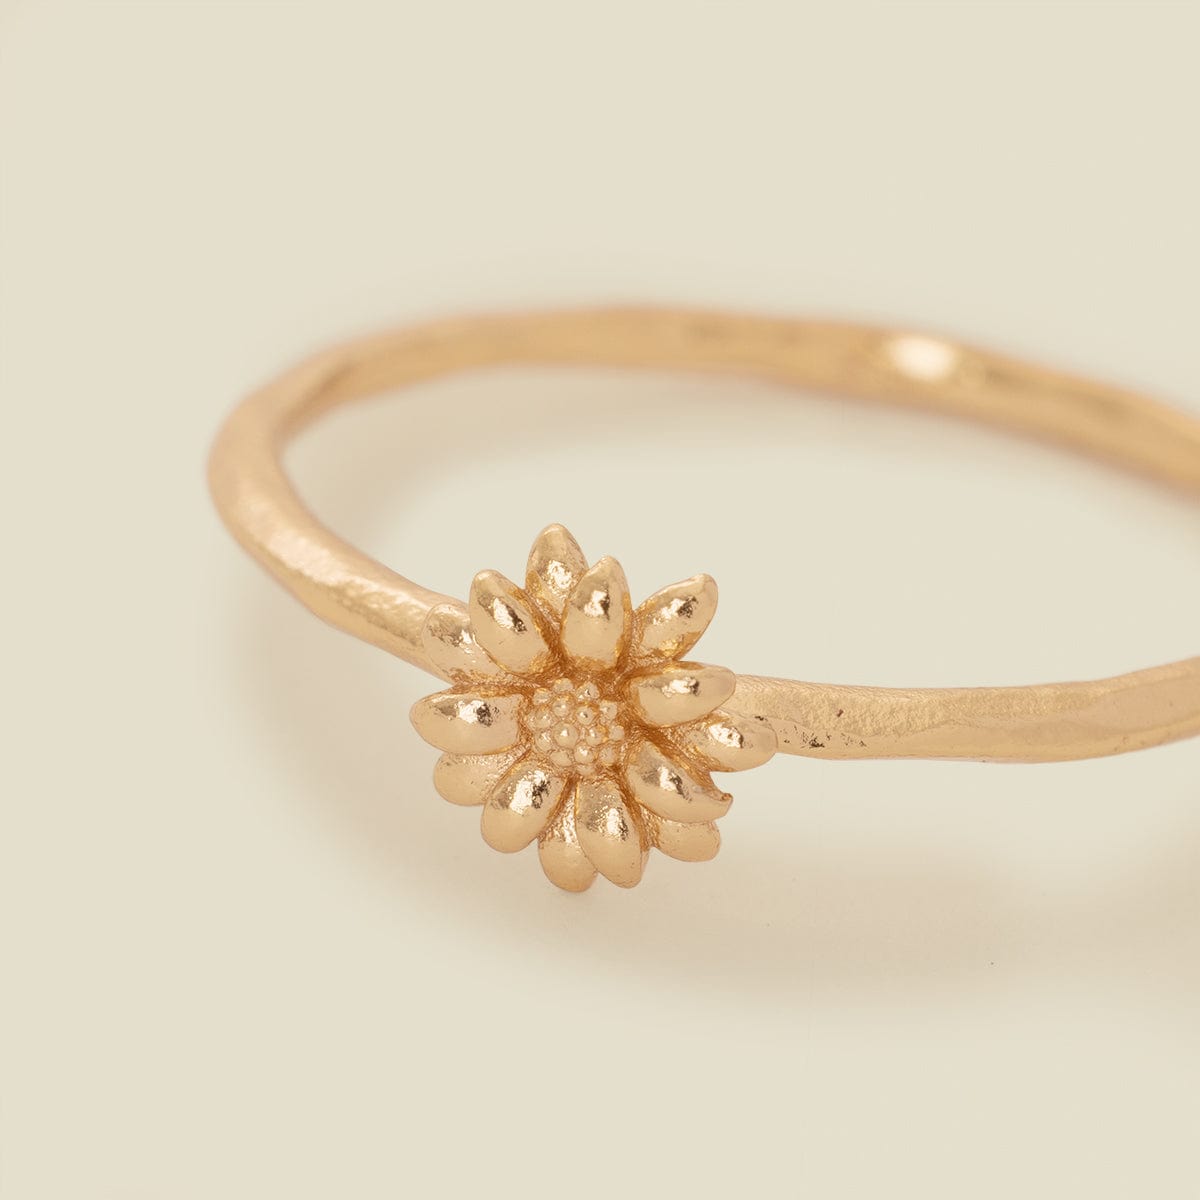 My ode to everyday elegance. This delicate gold ring complements any outfit  with understated beauty. @LuvKushJewellers . . P.S. Don't… | Instagram